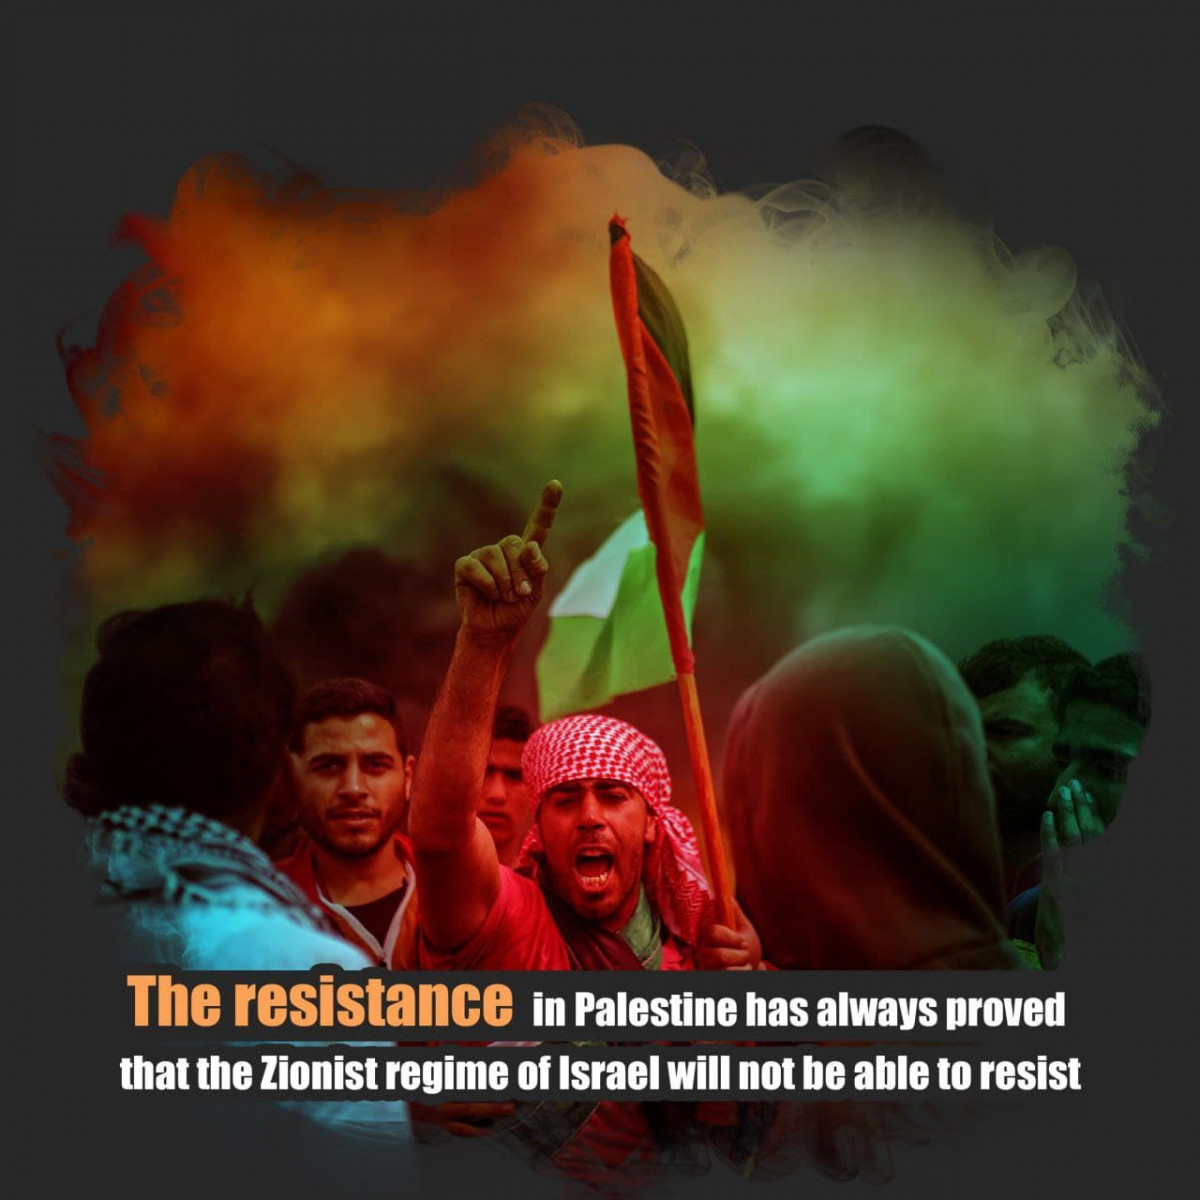 The resistance in Palestine has always proved that the Zionist regime of Israel will not be able to resist